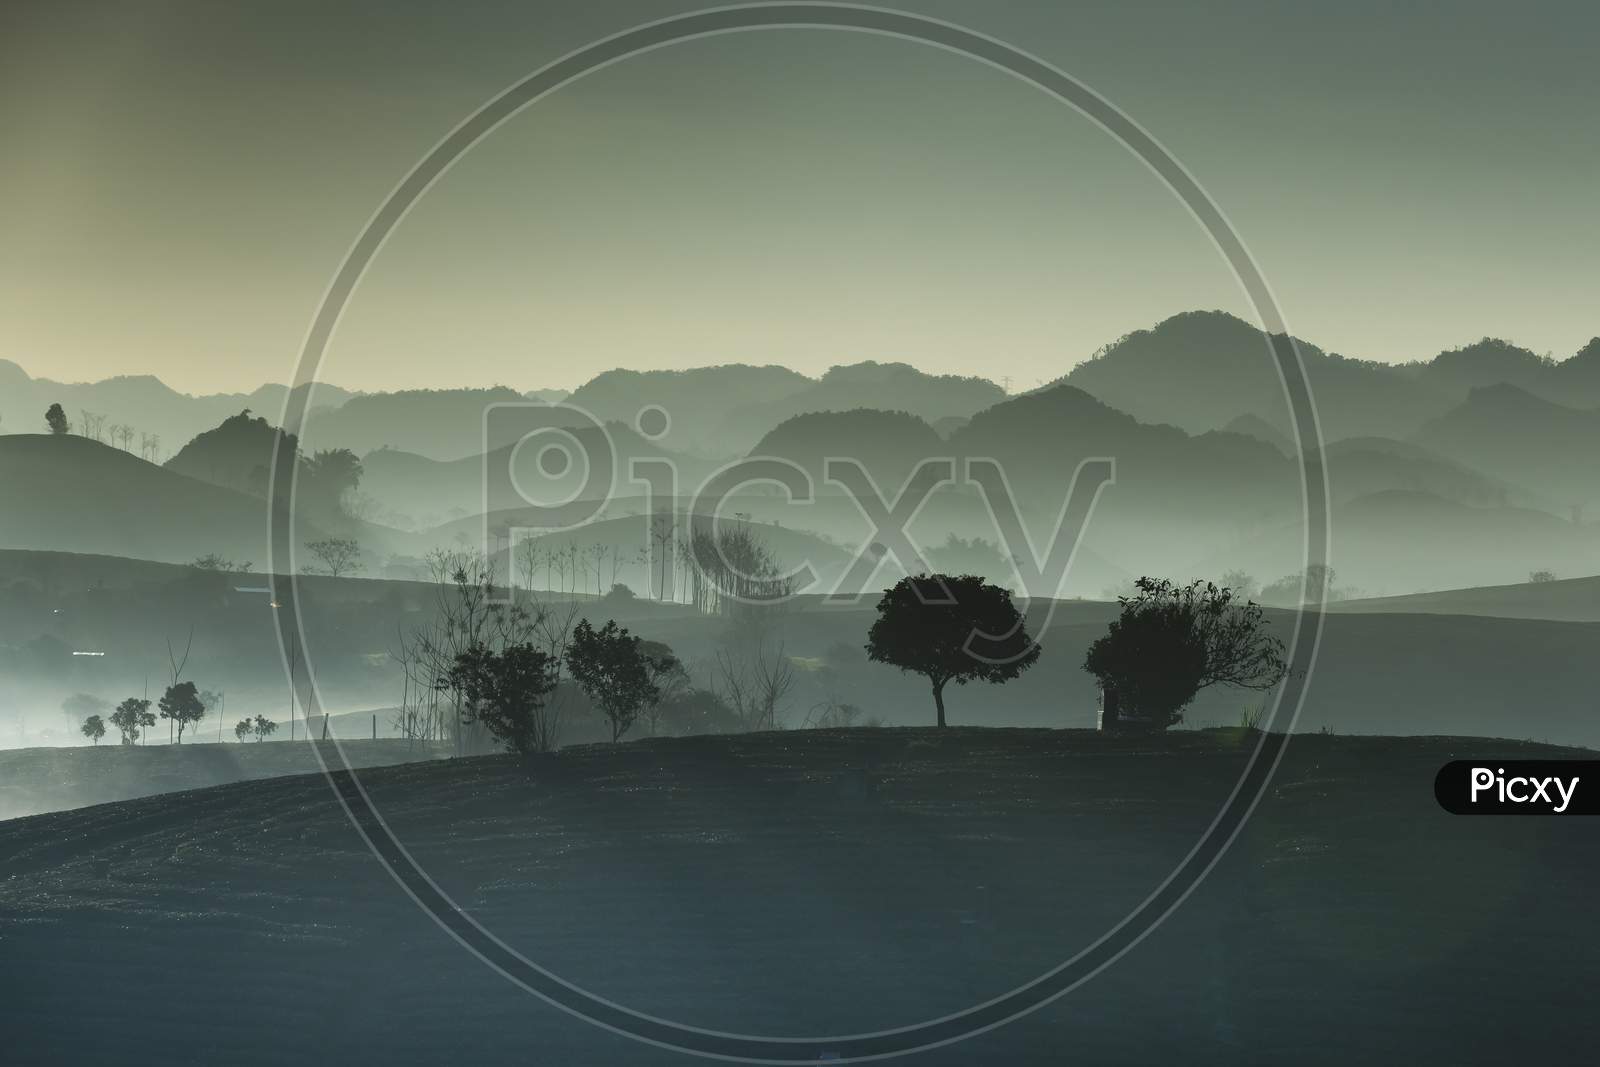 Fanciful dawn with early morning dew on tea plantations